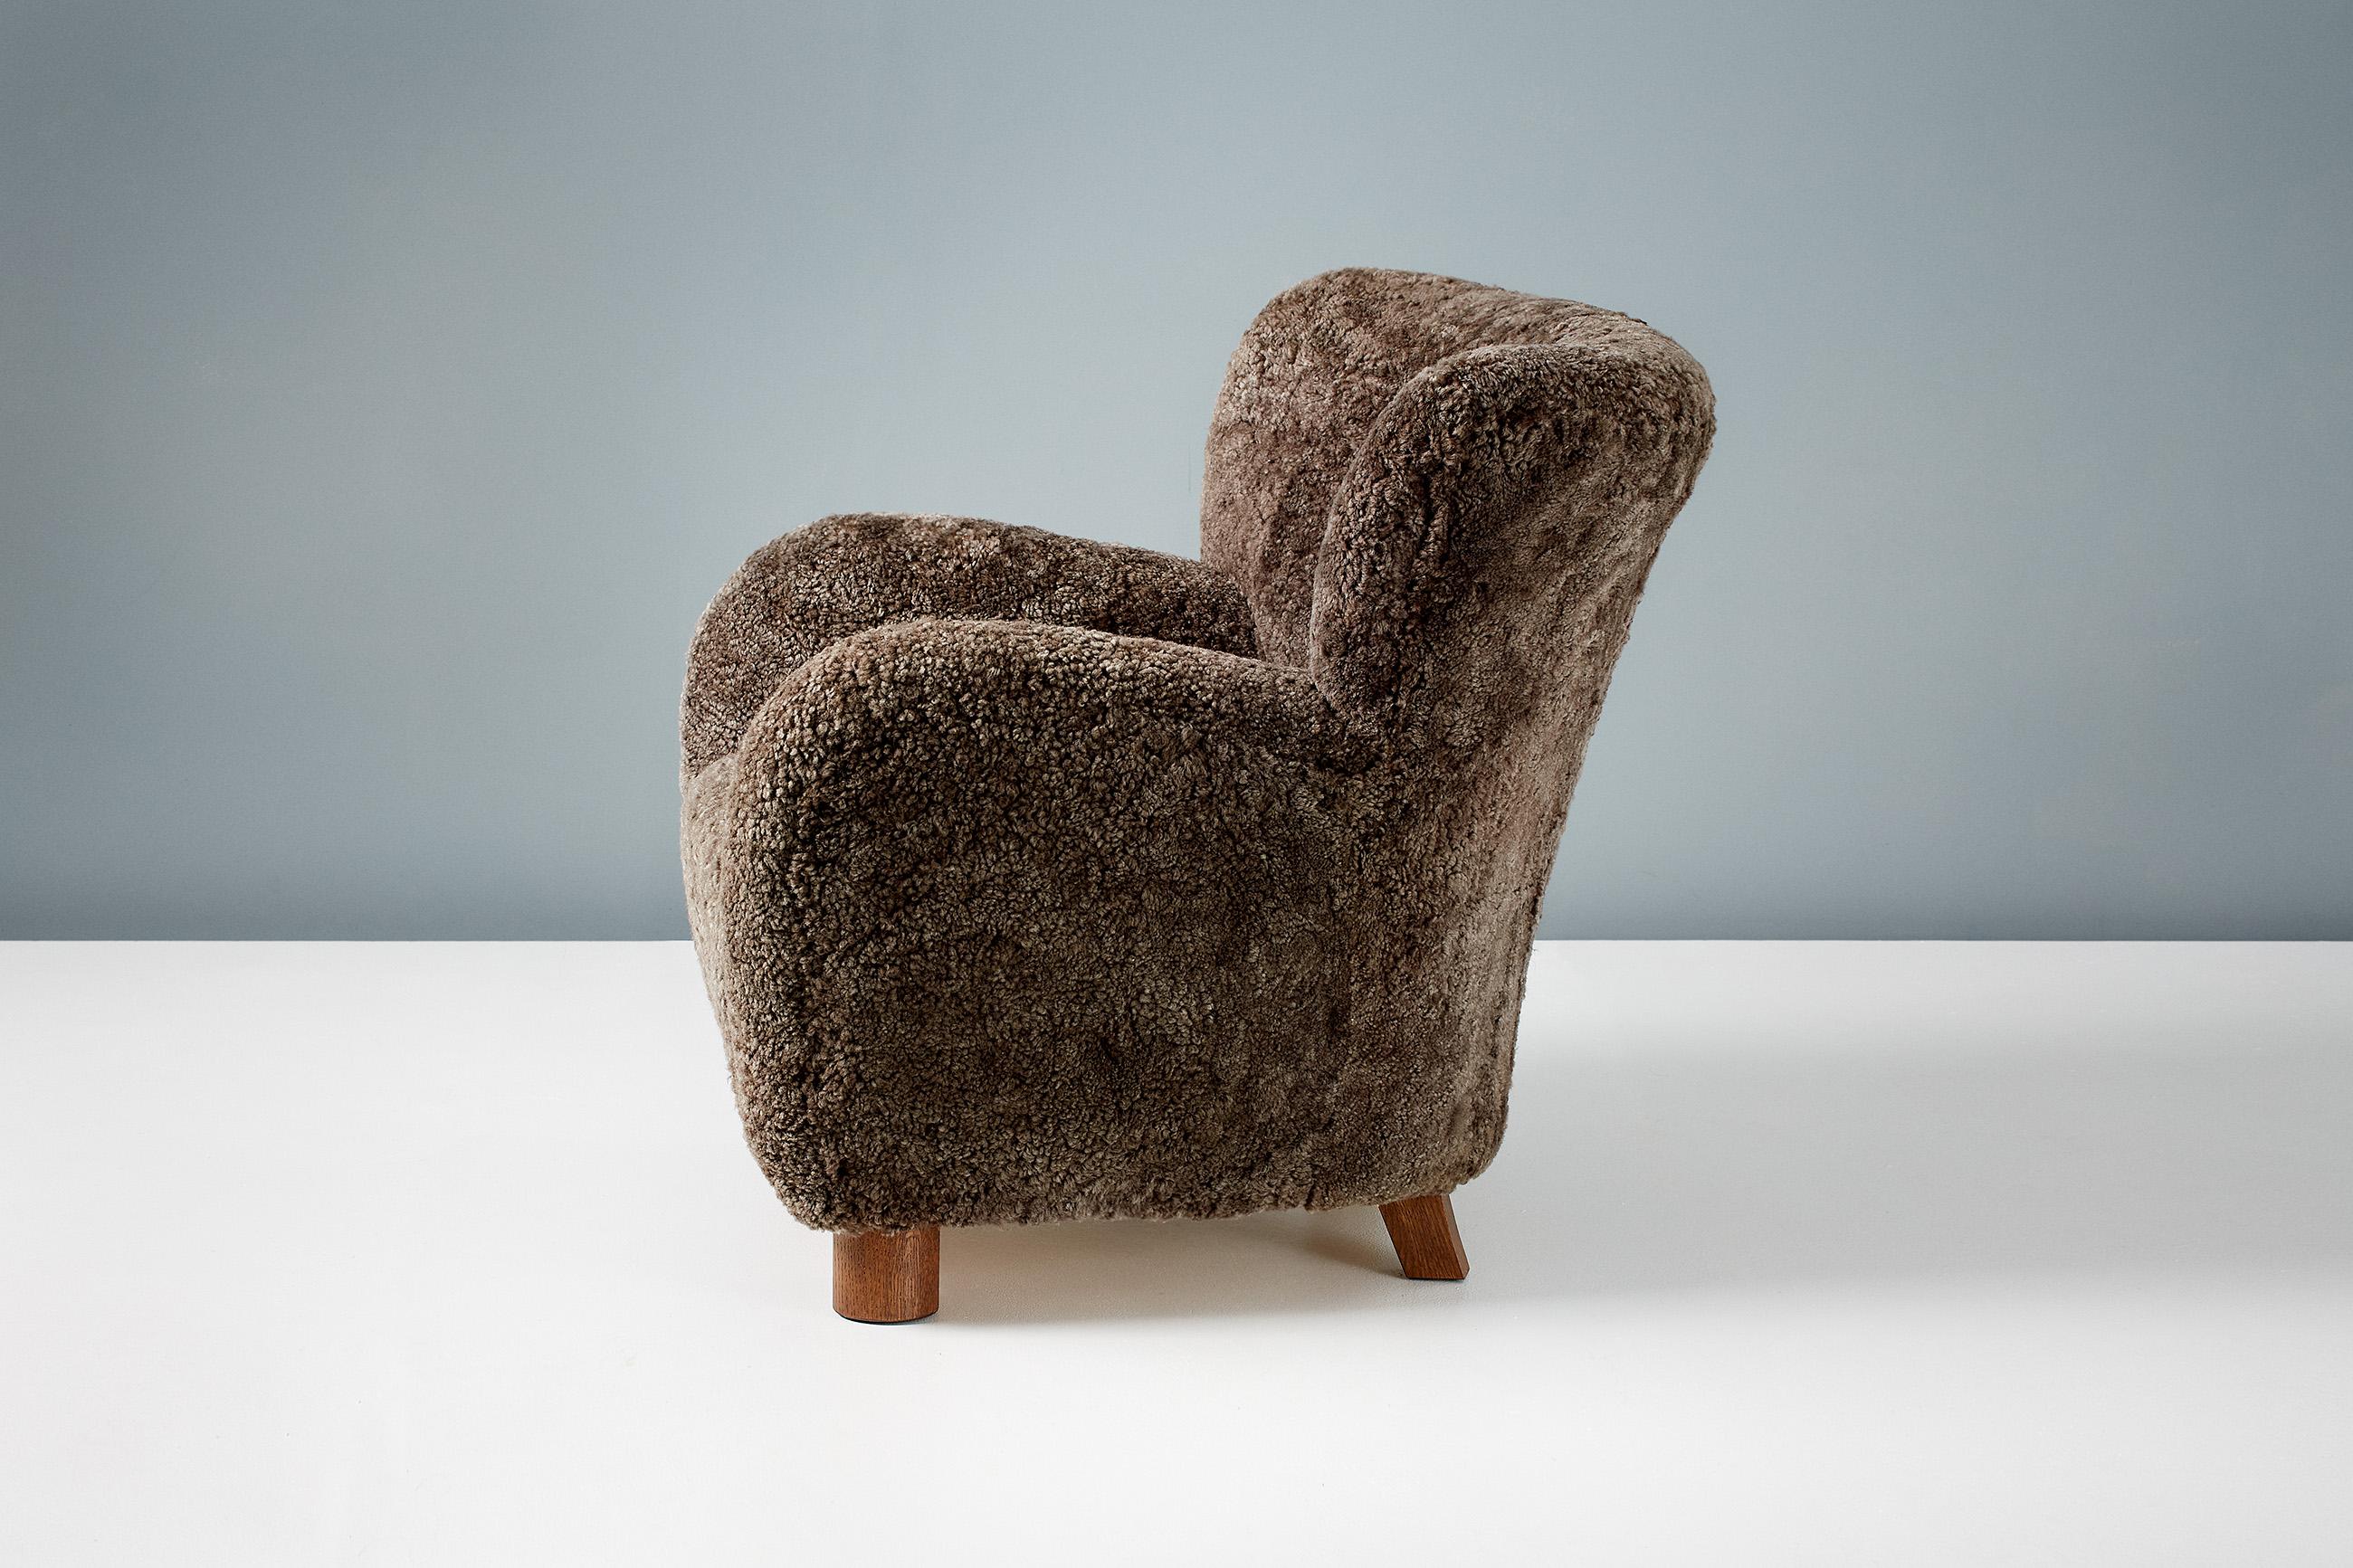 Pair of Custom Made Sheepskin Lounge Chairs In New Condition For Sale In London, England